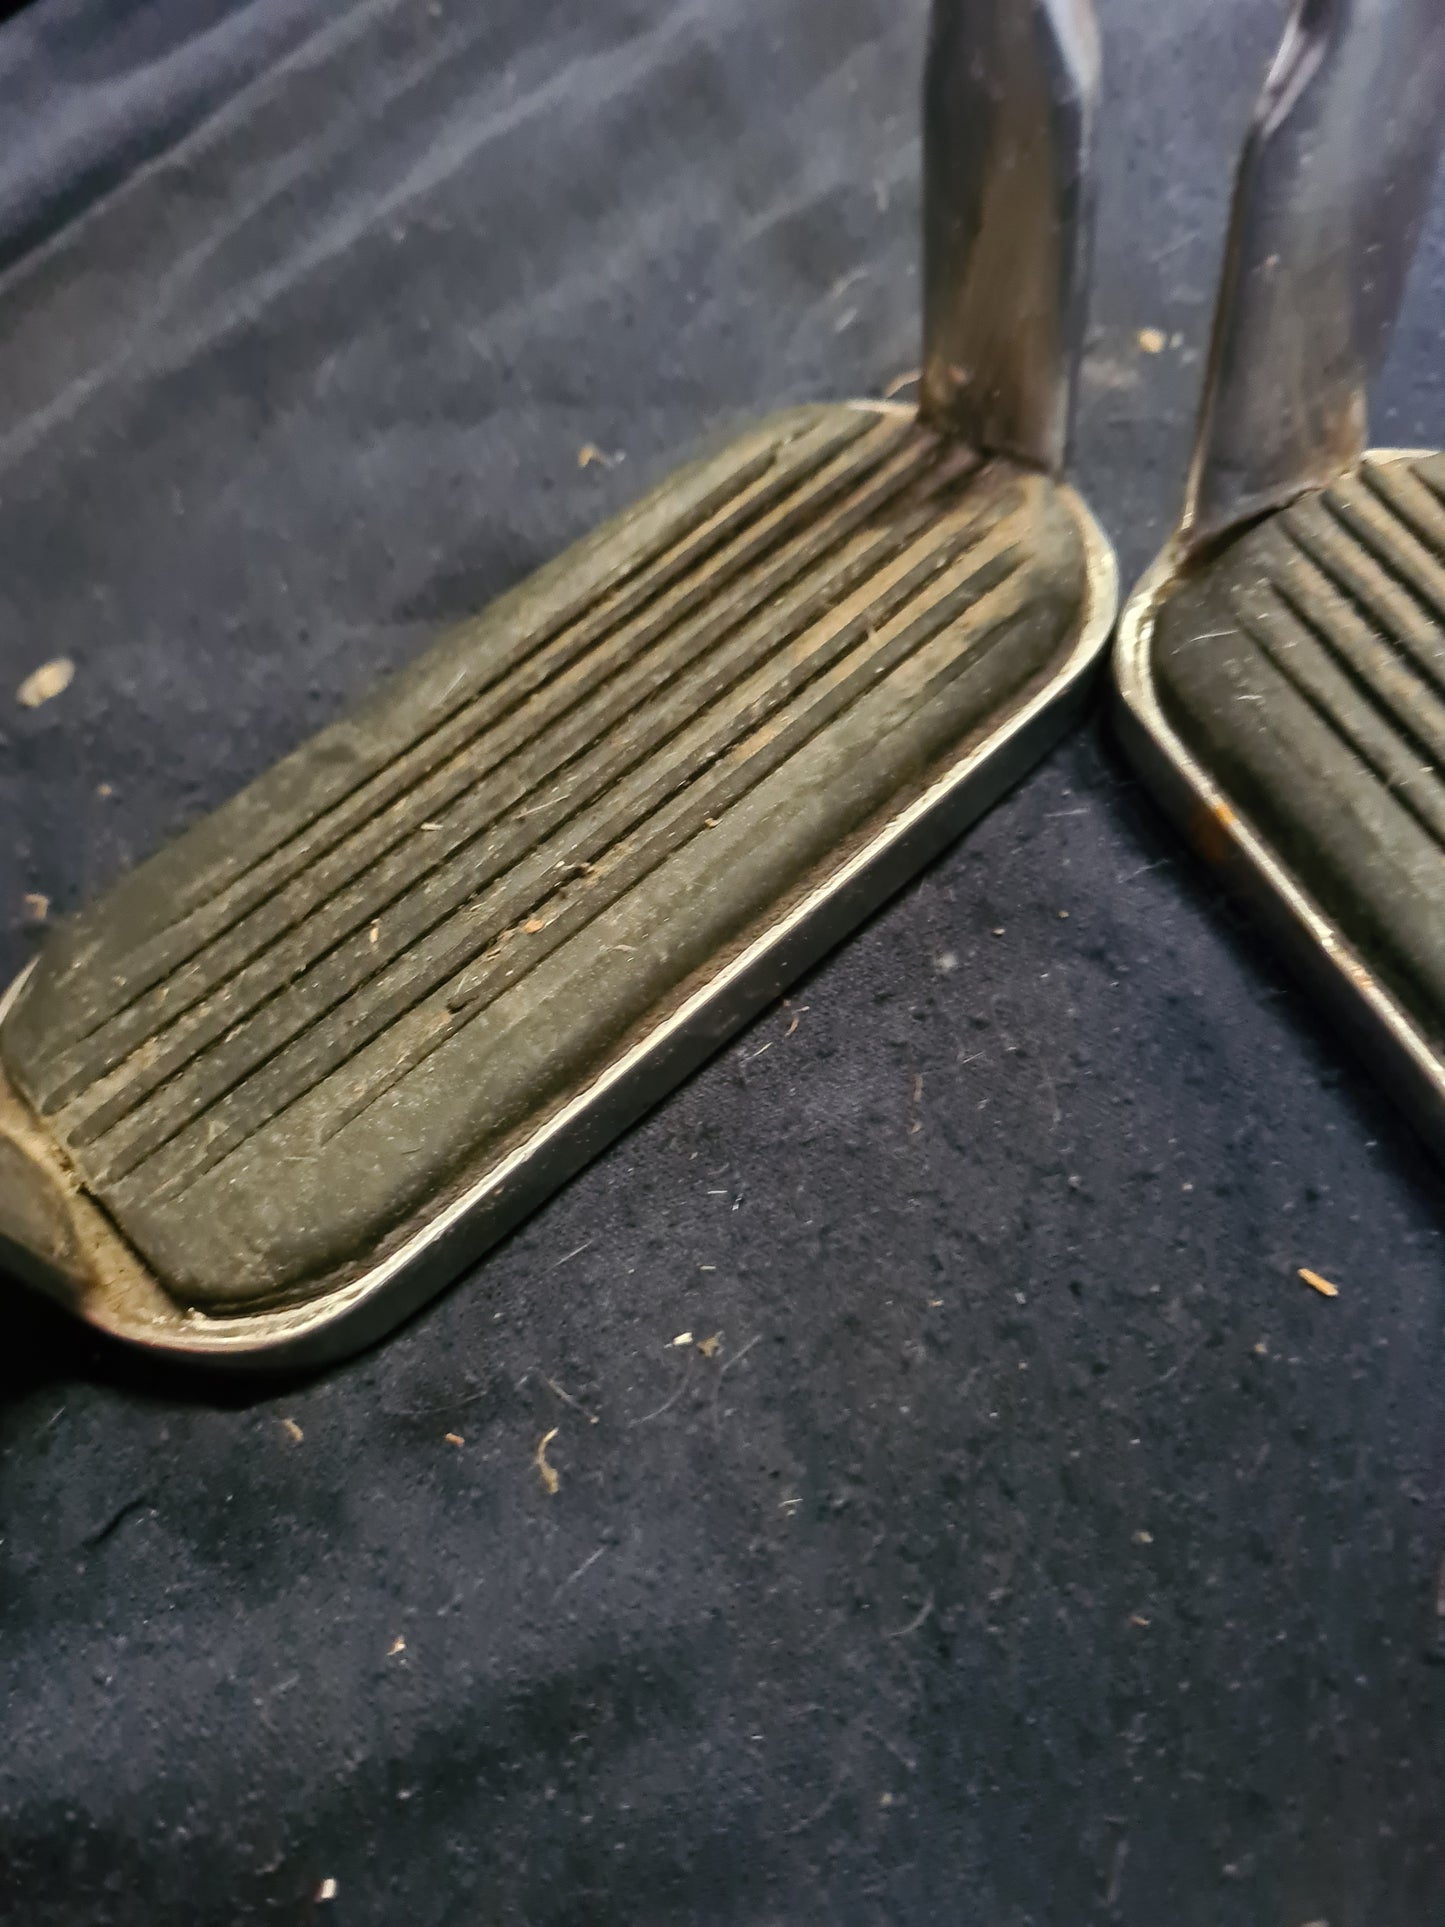 Used 4-1/4" stirrup irons with rubbers (FREE POSTAGE)